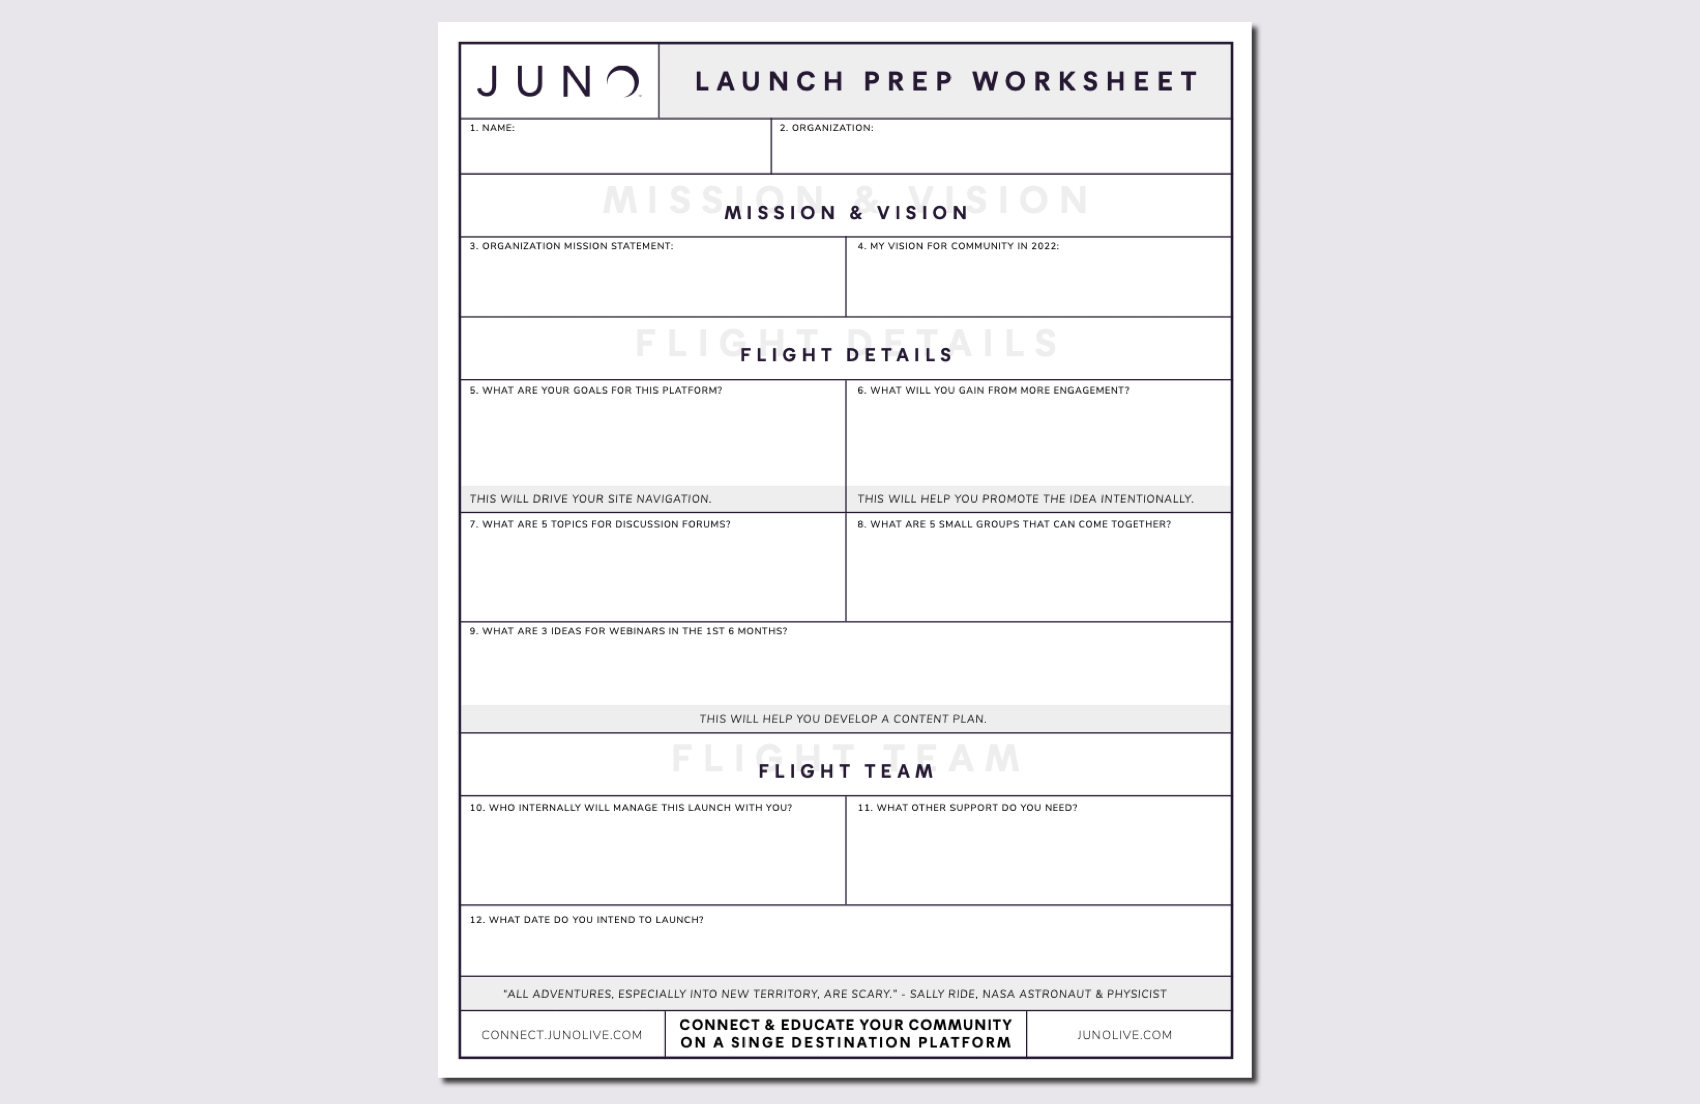 A preview of the Launch Prep Worksheet, with blank form fields.